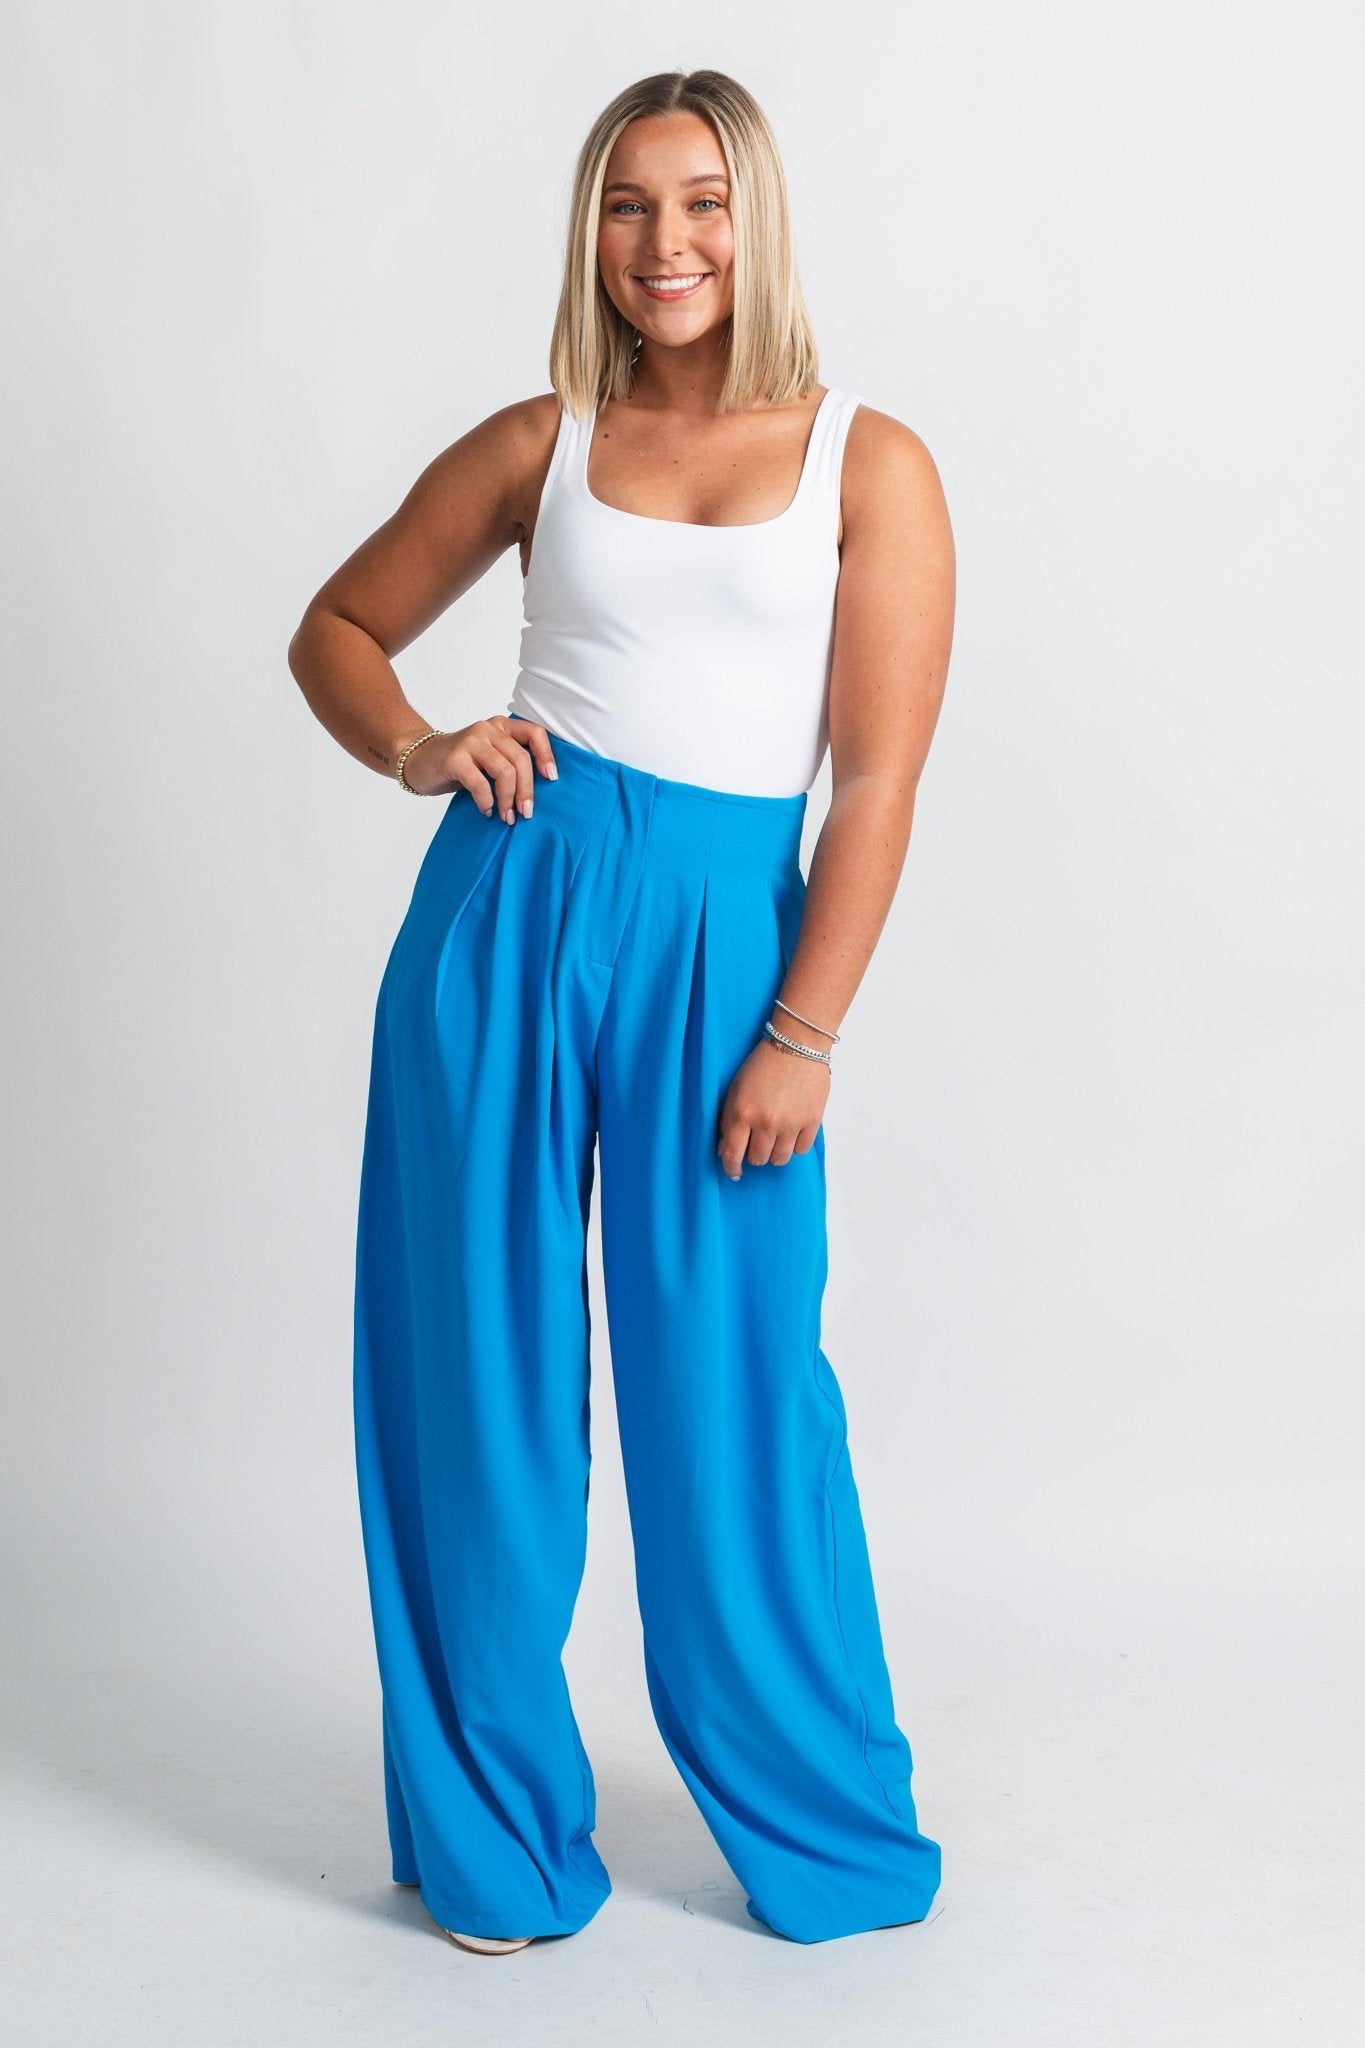 Pleated wide leg pants ocean blue - Stylish Pants - Trendy Staycation Outfits at Lush Fashion Lounge Boutique in Oklahoma City